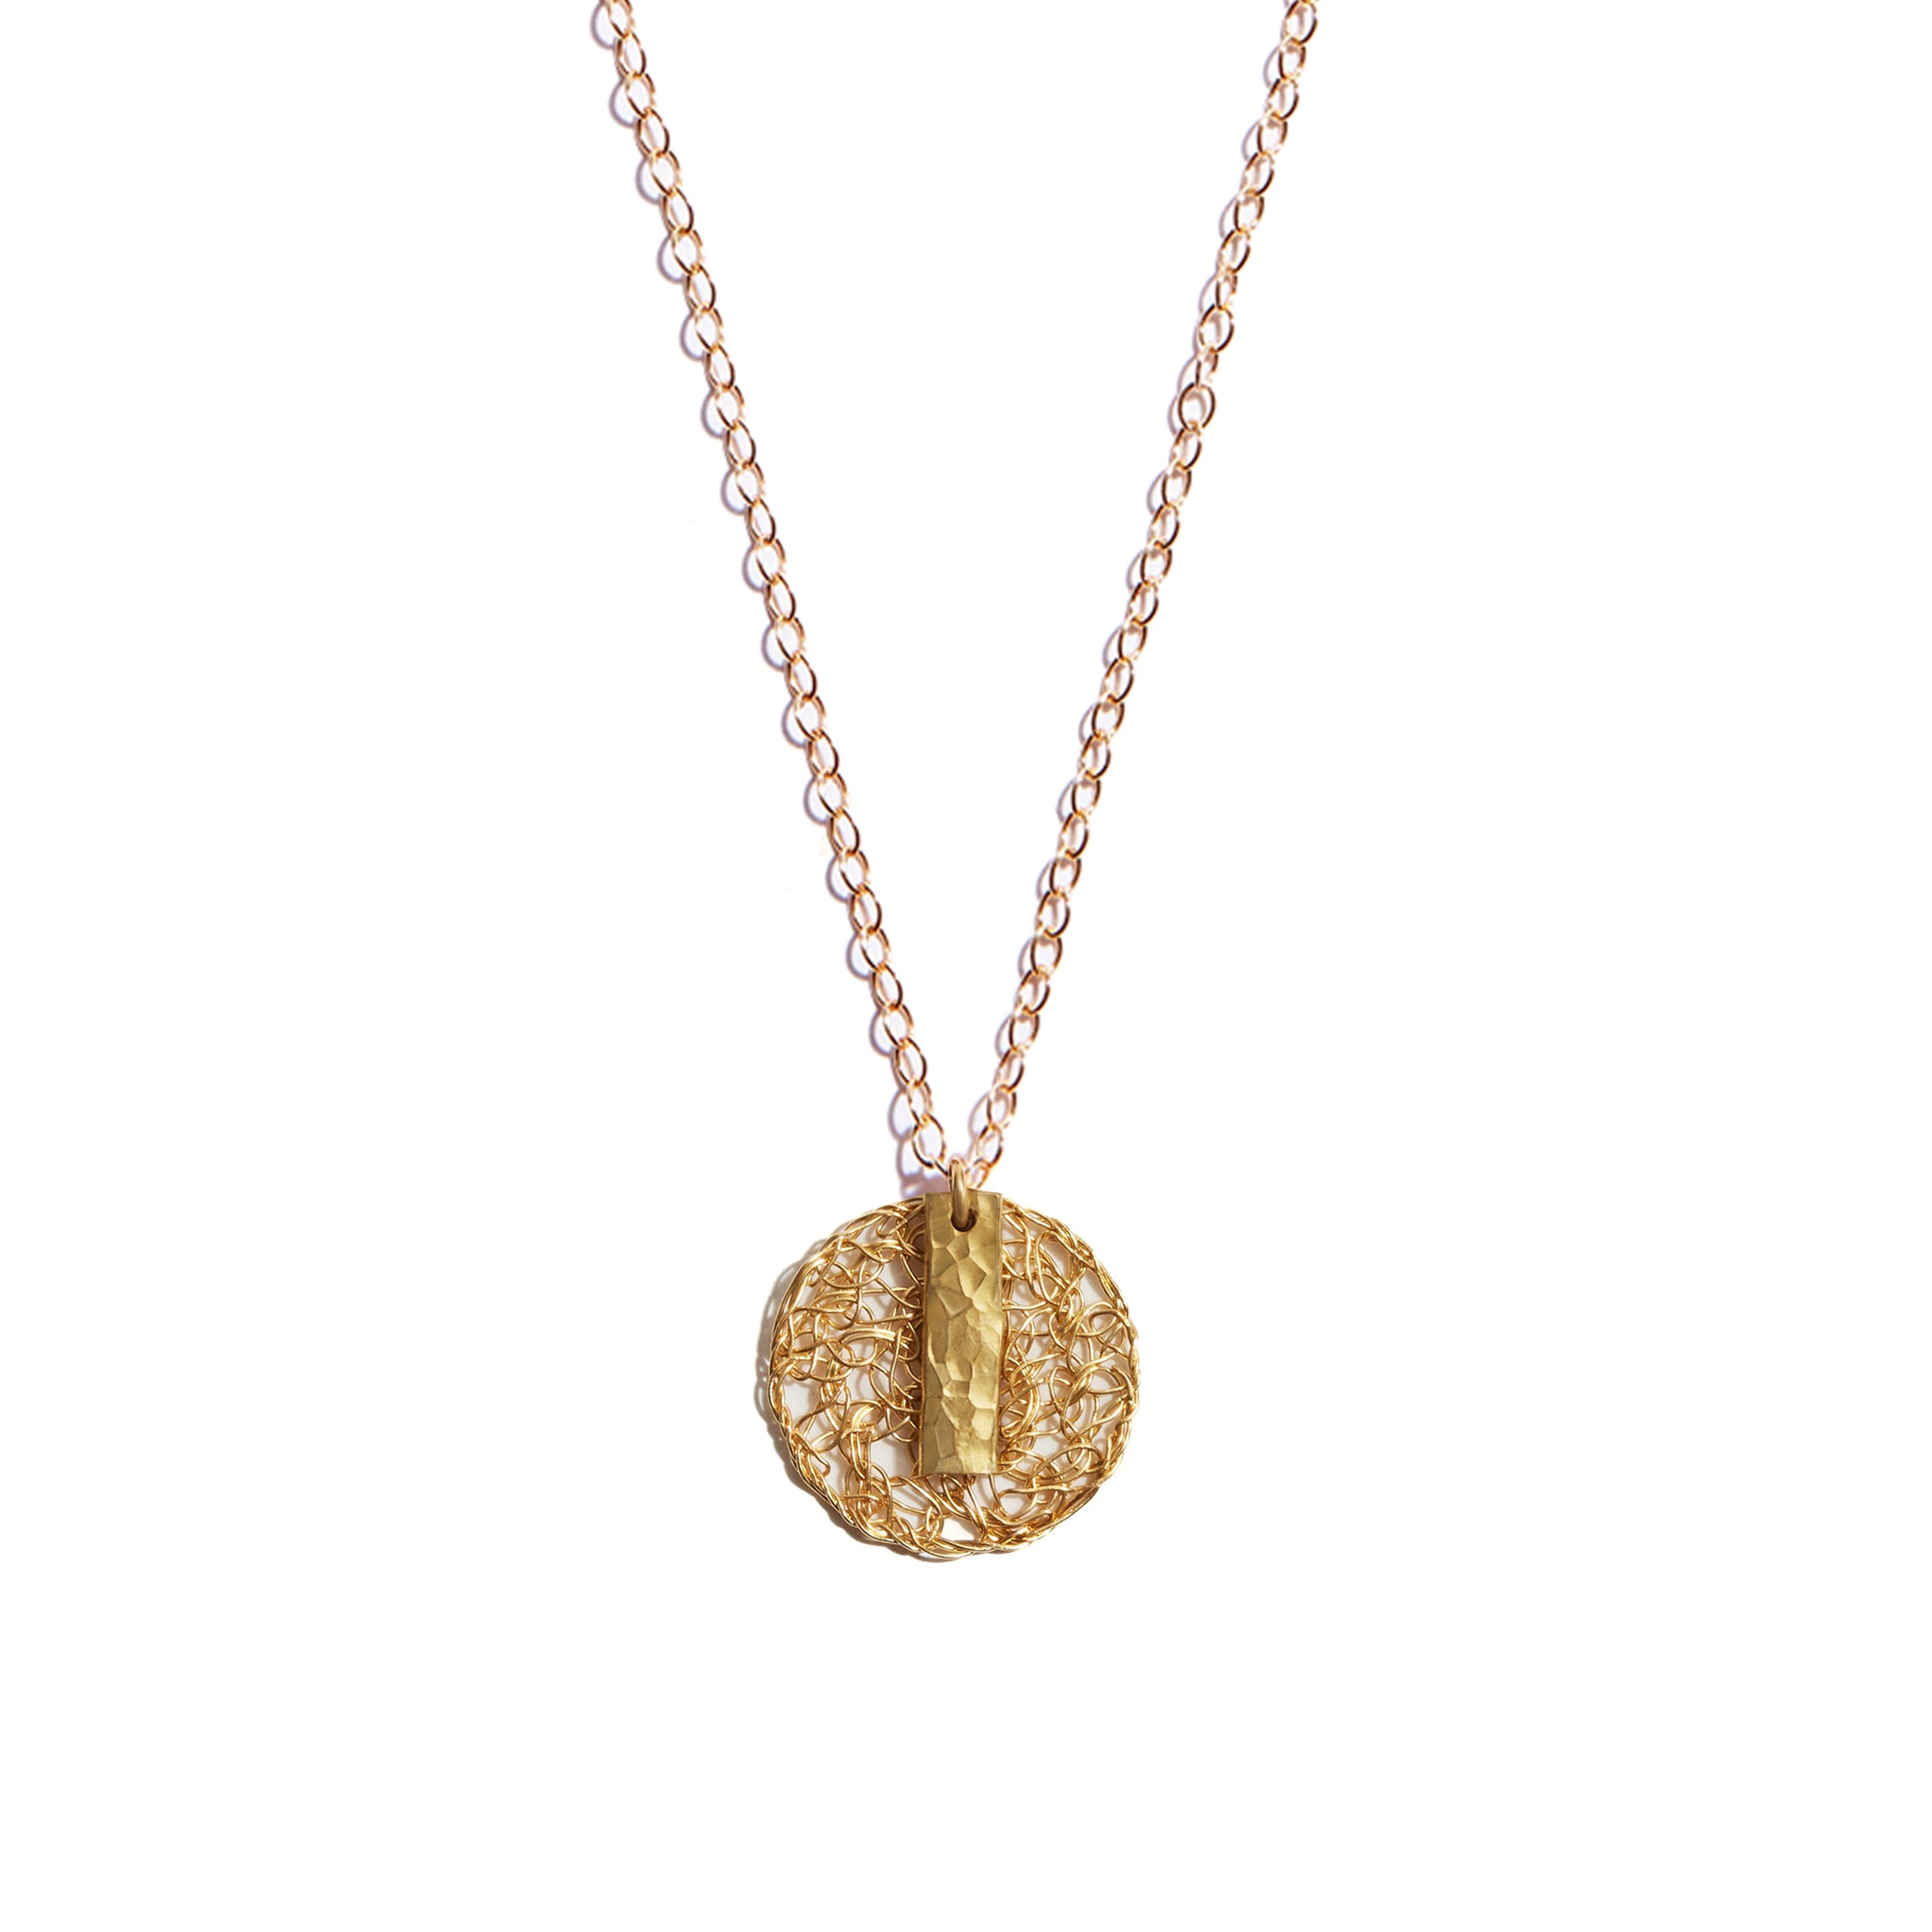 The Fí Bar Pendant marries two of Seoidín's signature styles; woven gold adding a delicated hand-hammered gold bar, making this a wonderfully unique, yet elegant piece. 